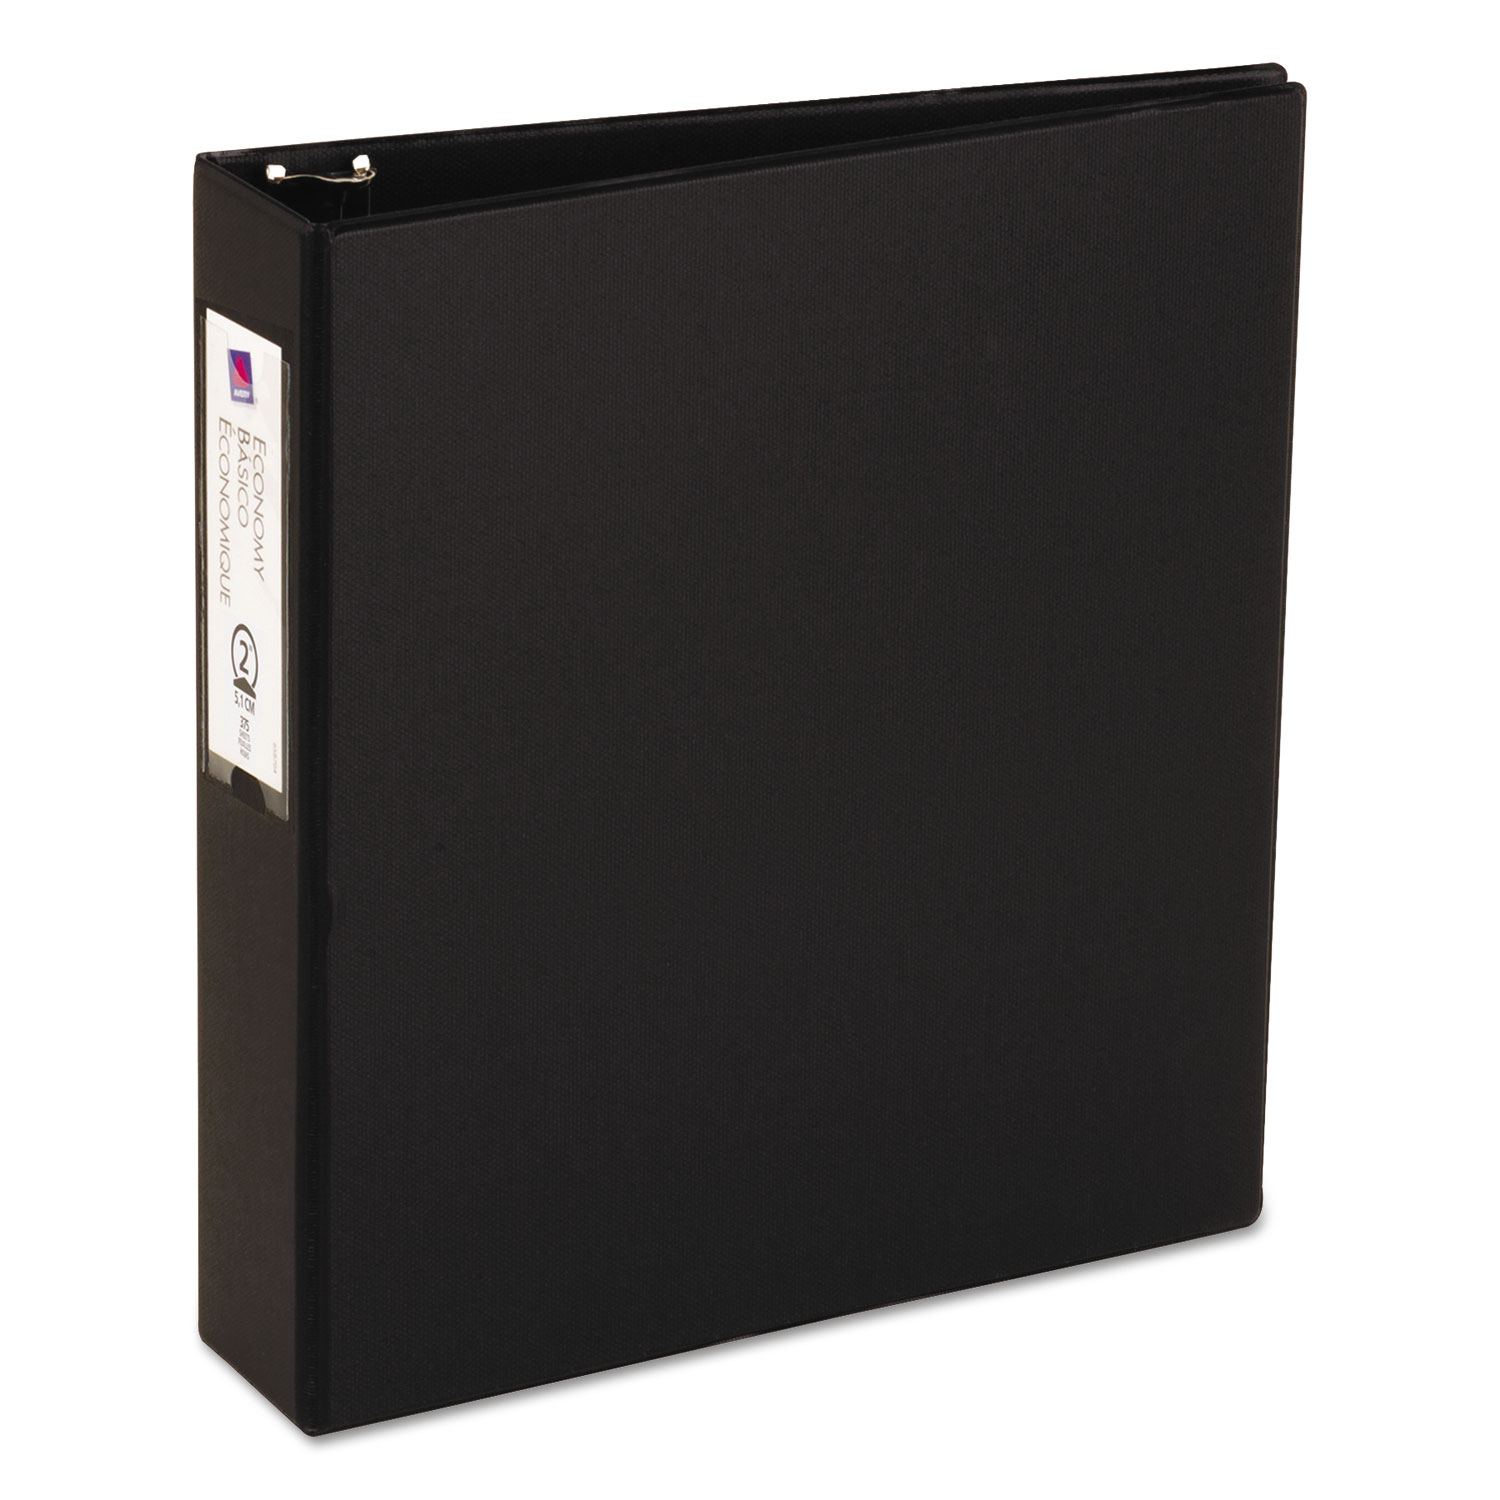  Avery 04501 Economy Non-View Binder with Round Rings, 3 Rings, 2 Capacity, 11 x 8.5, Black (AVE04501) 